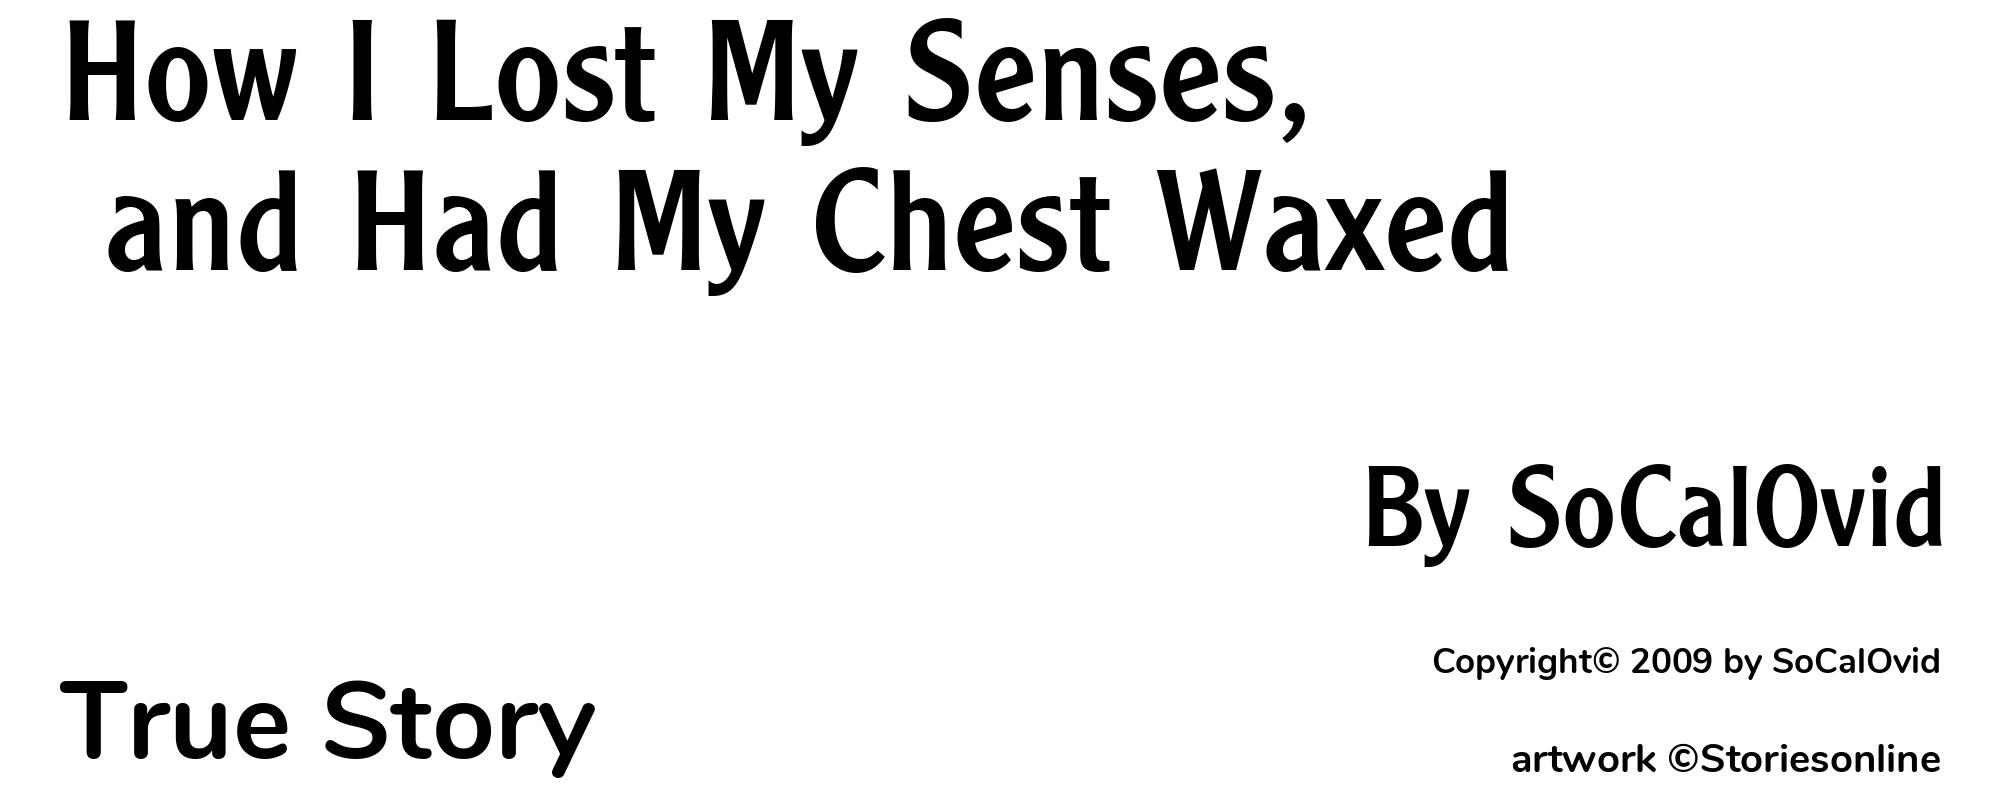 How I Lost My Senses, and Had My Chest Waxed - Cover